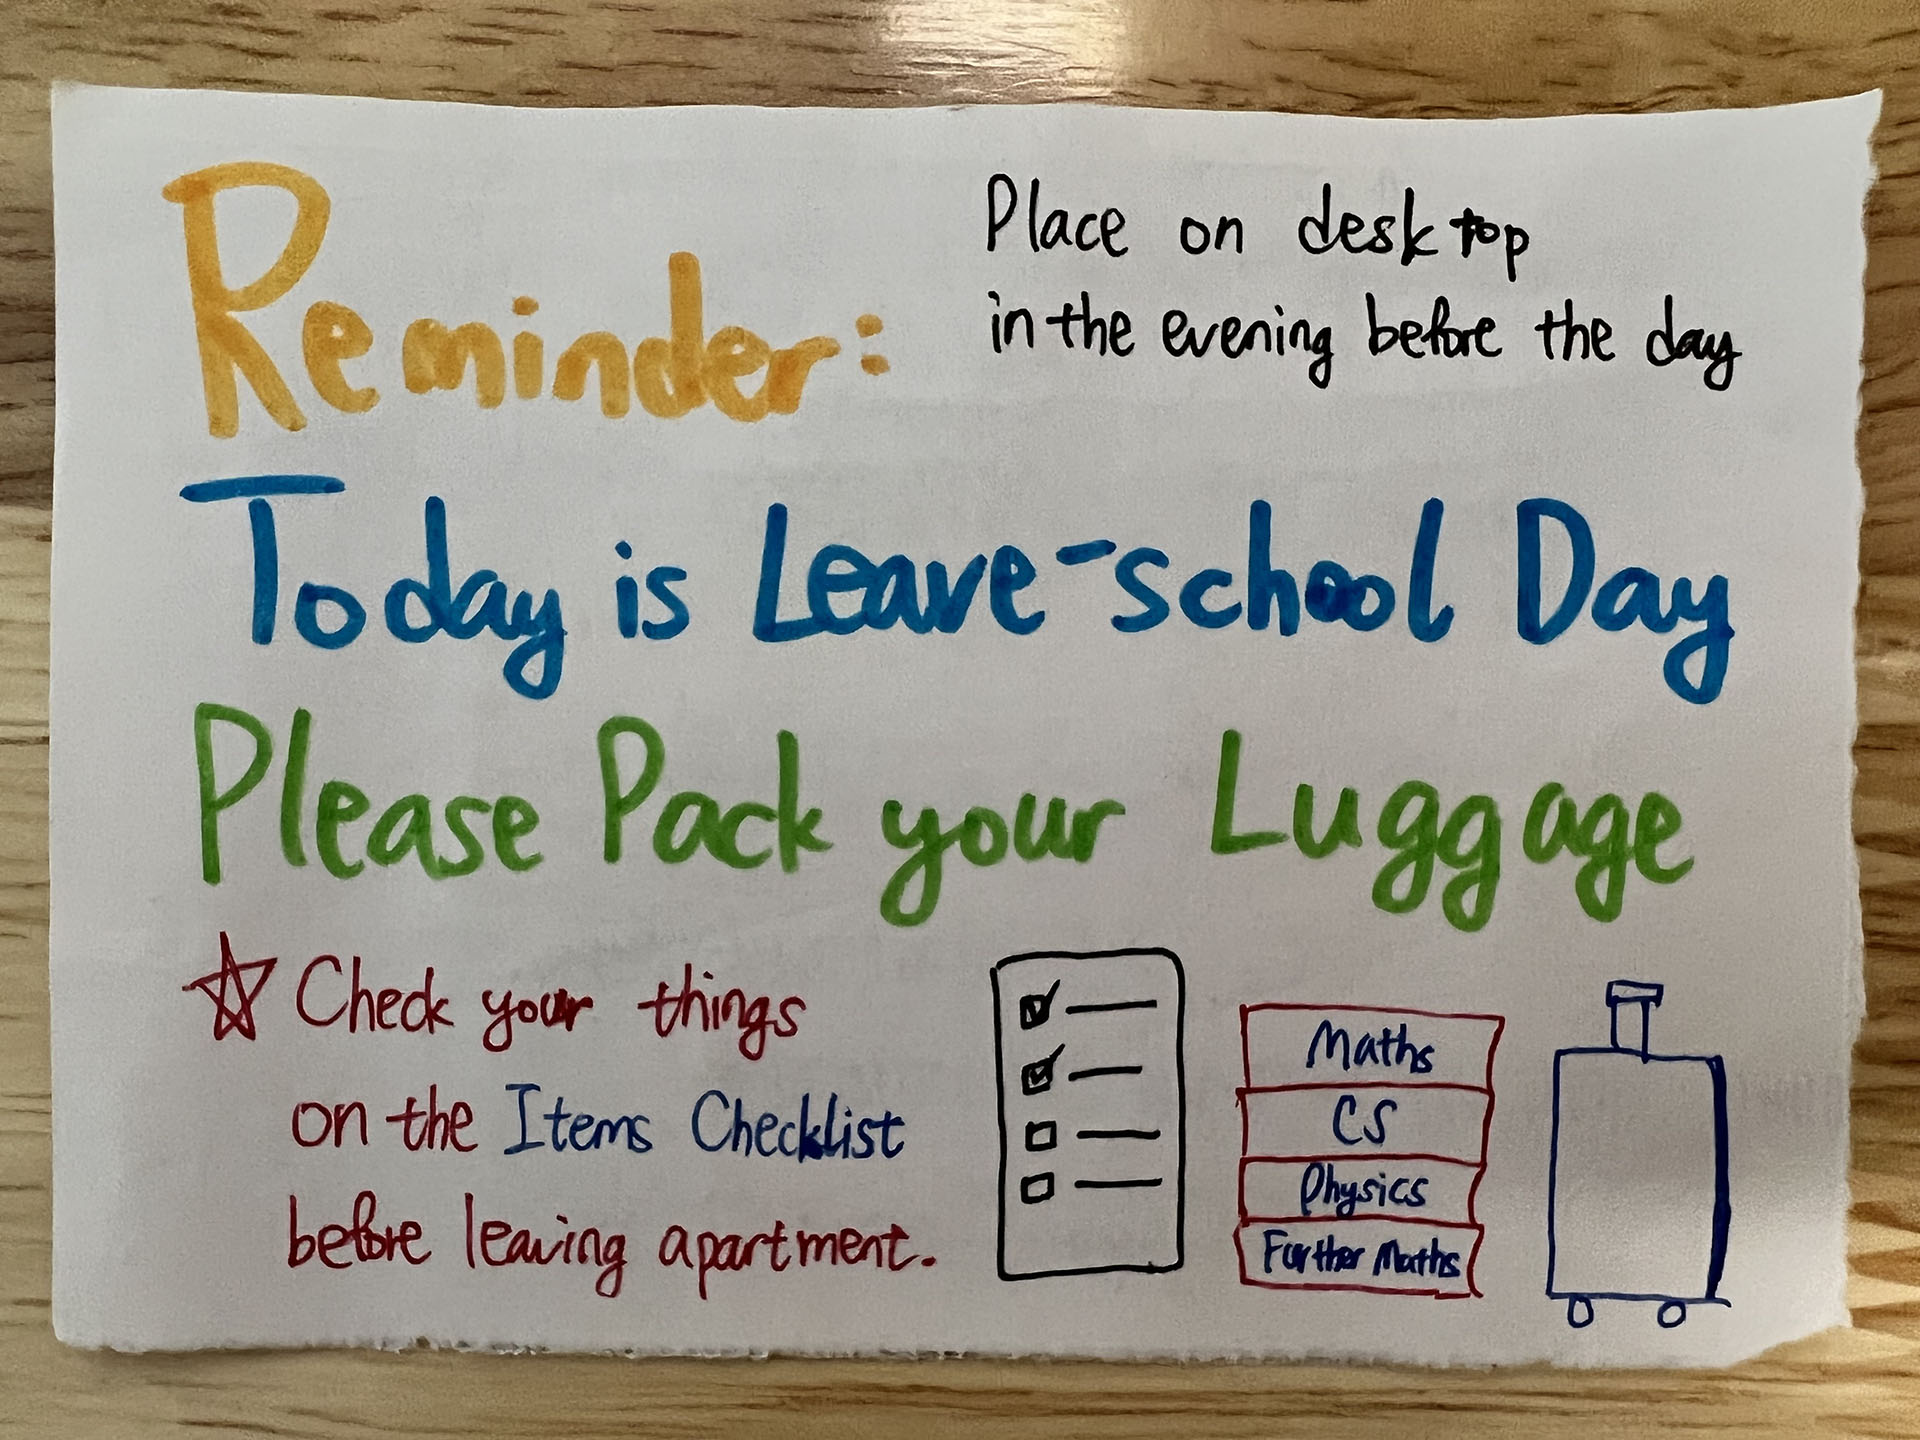 Leave-school Day Notice